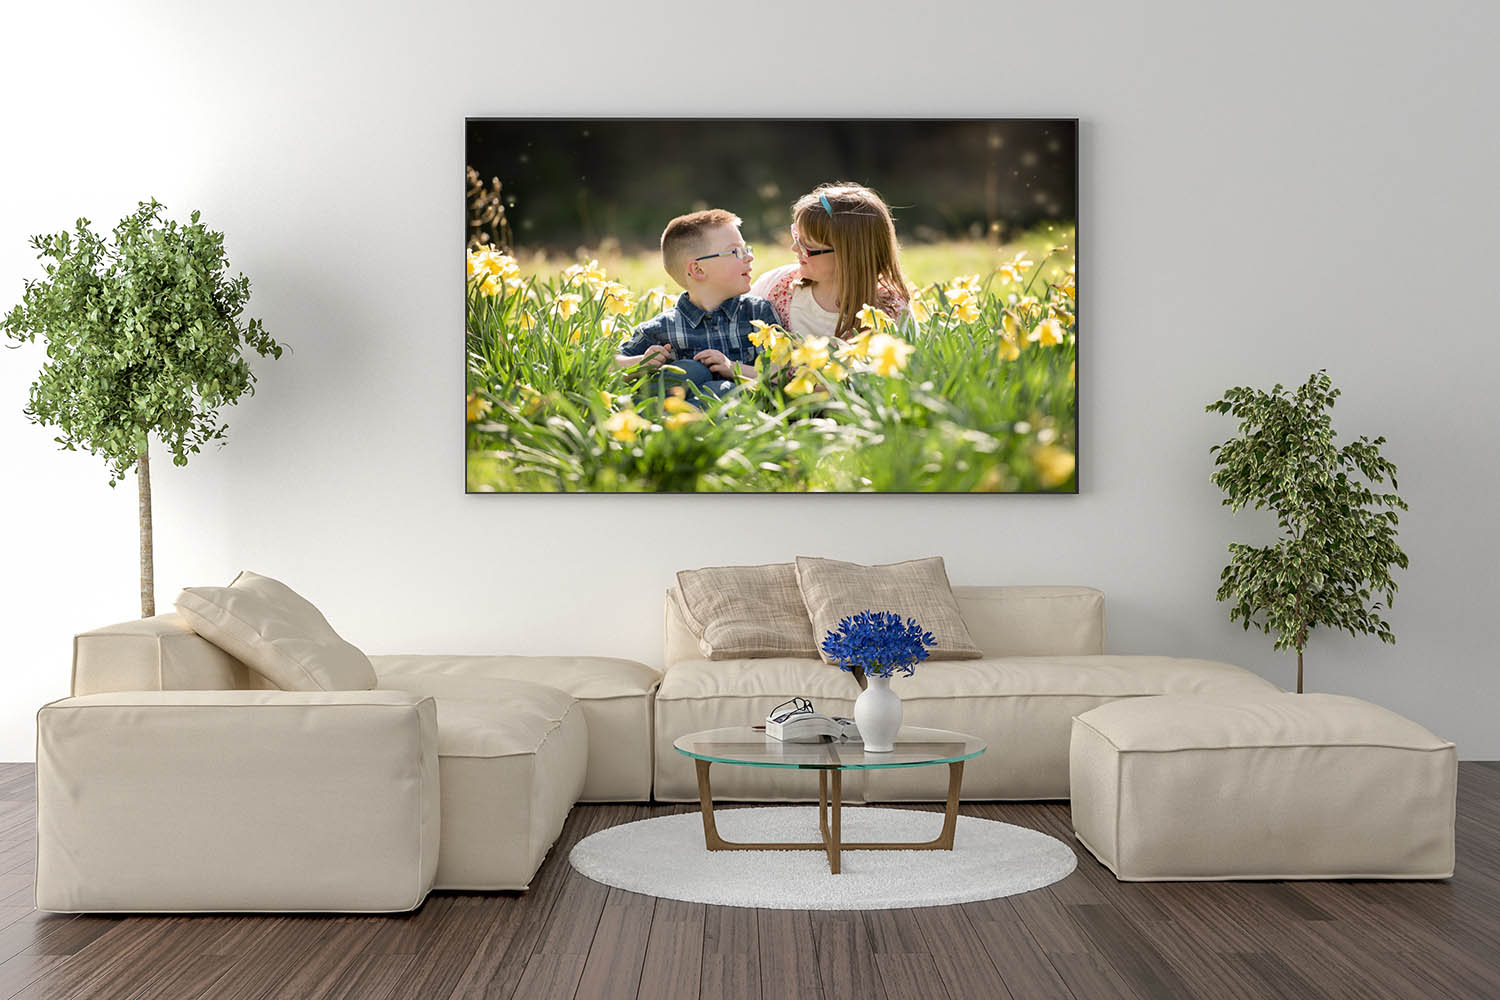 Living room with large picture frame on wall of little boy and girl sitting in daffodils